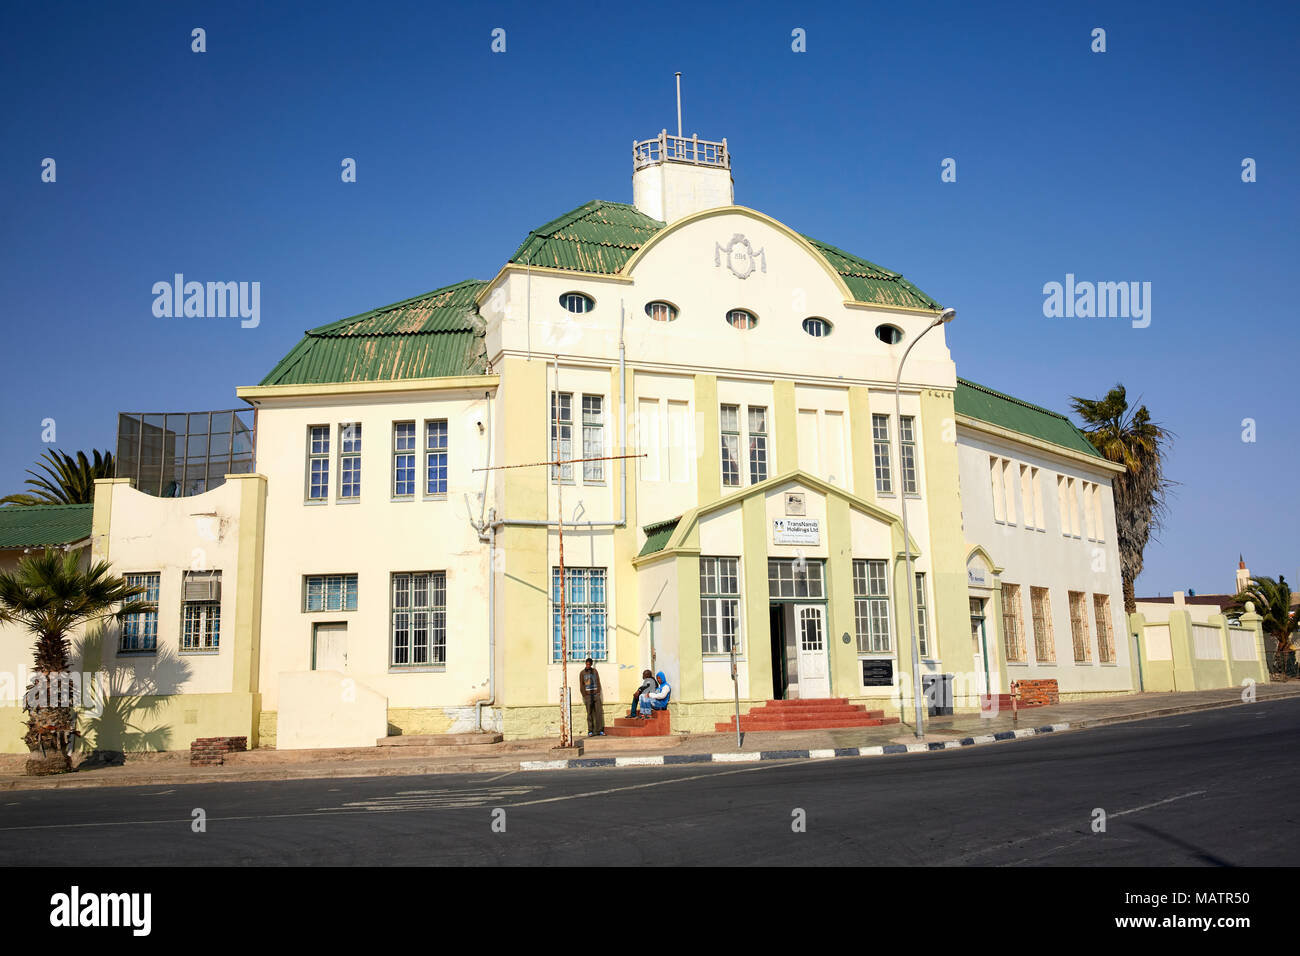 Entrance to the Luderitz train station located in a colonial building in Luderitz, Namibia, Africa Stock Photo